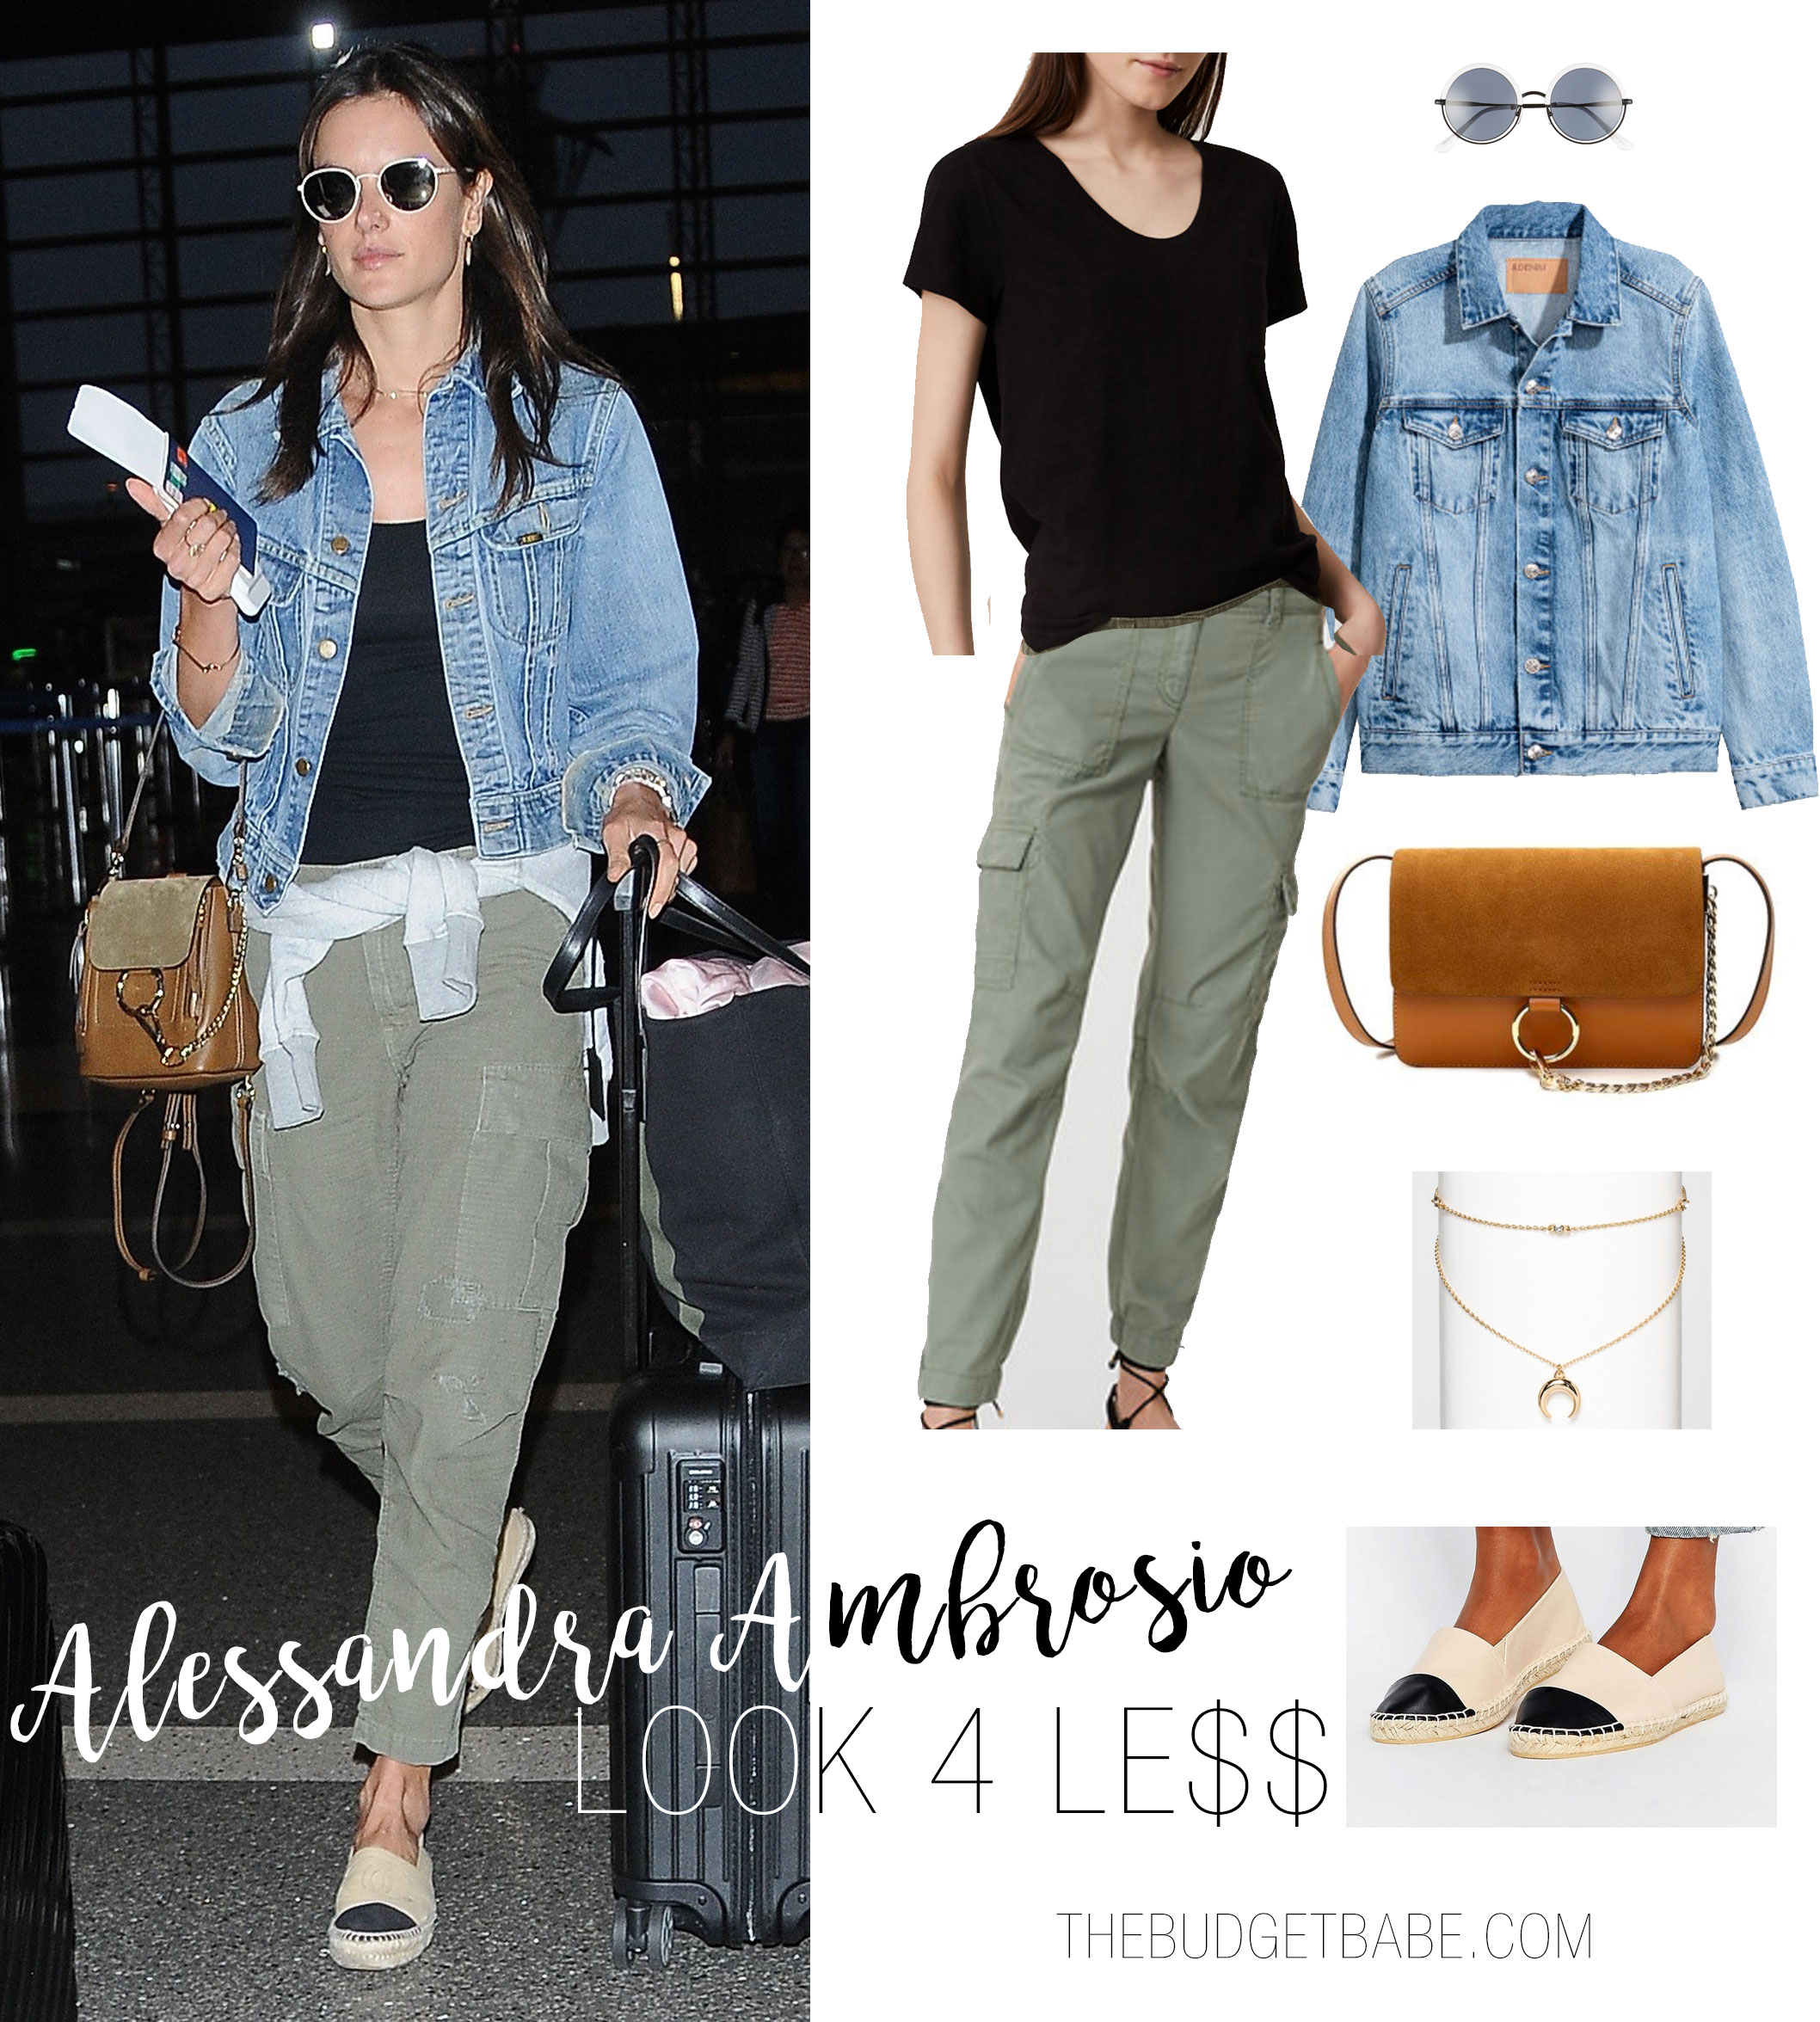 Alessandra Ambrosio's airport style is casual and cool, with a black tee, olive cargos and denim jacket.